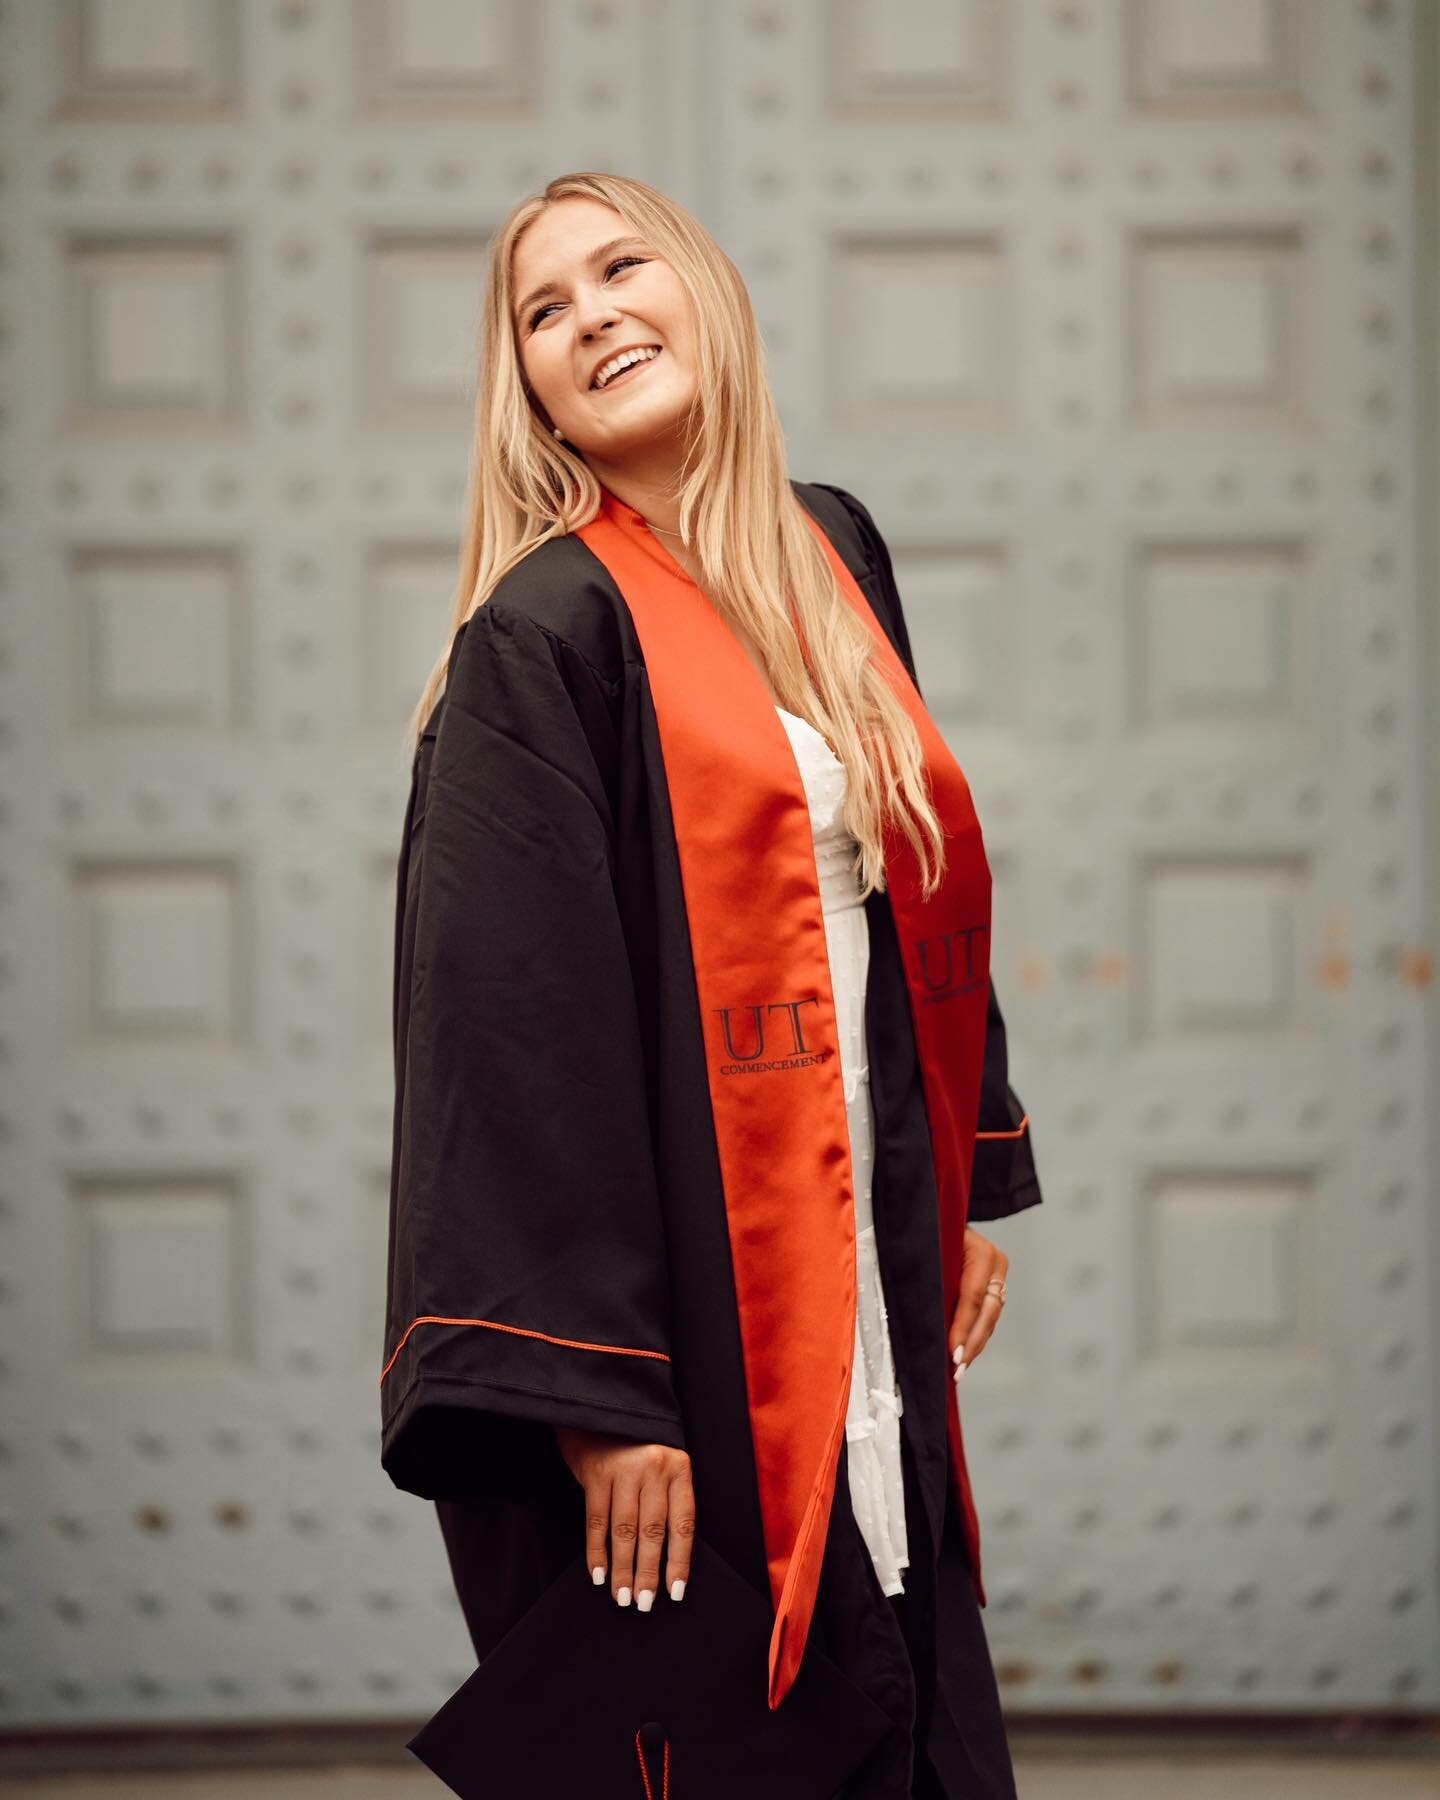 Calling all Graduates!! 🎓 

Book your tan now for your big day! $35 full body student tans! 

Call, DM, or visit our website to book an appointment.

#graduation #co2021 #seniors #utsenior #utgraduatipn #hookem #austin